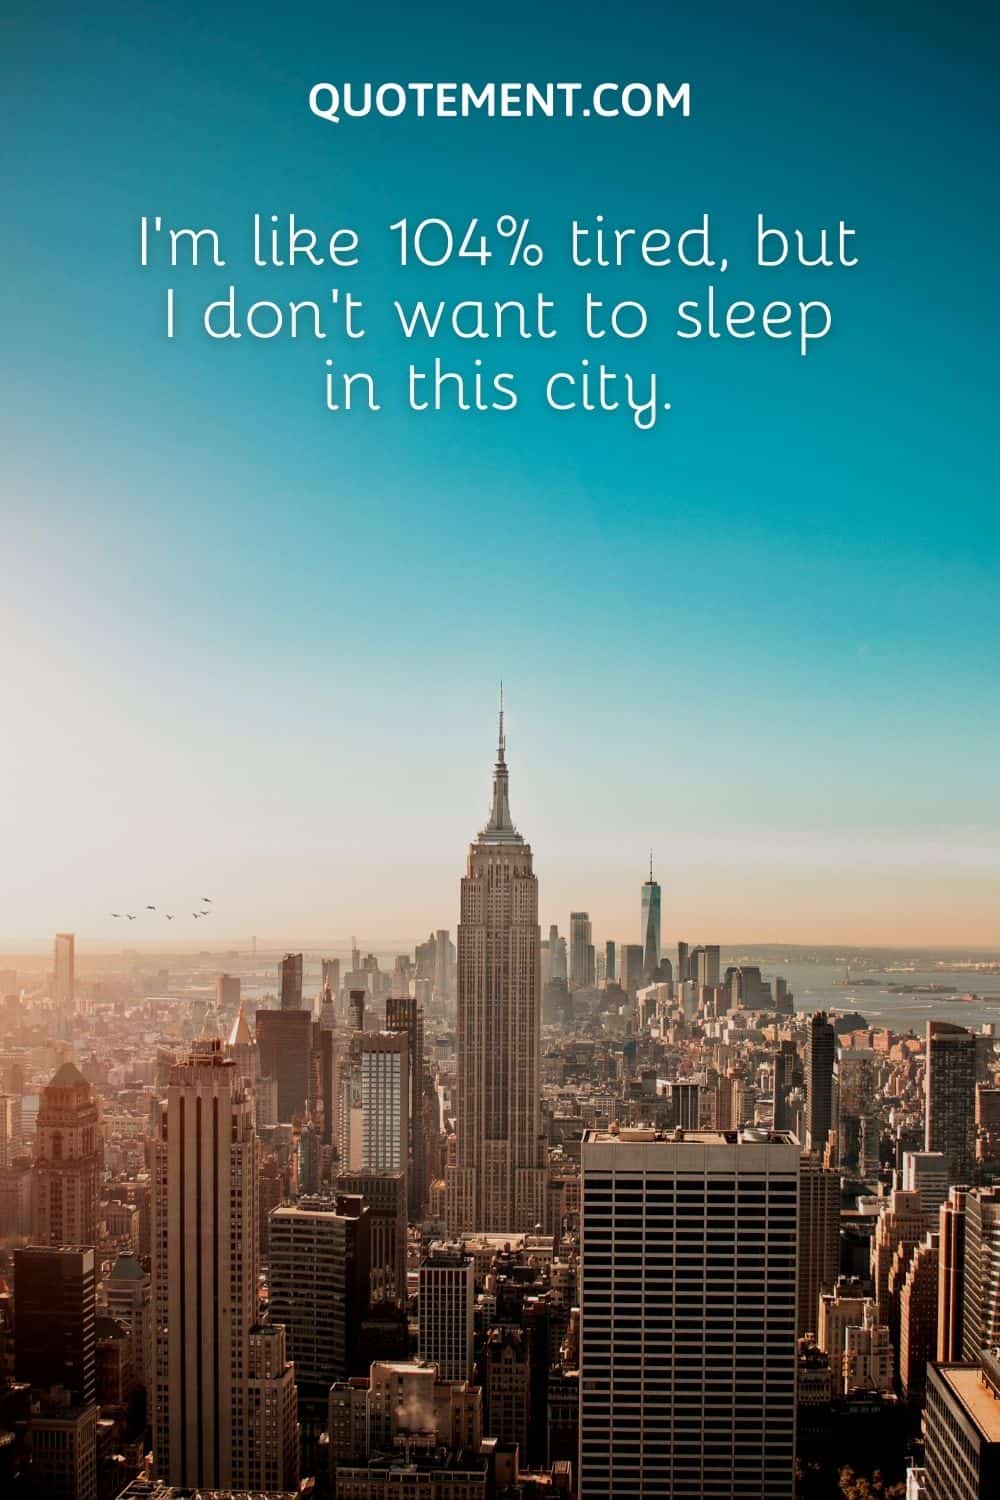 I'm like 104% tired, but I don't want to sleep in this city